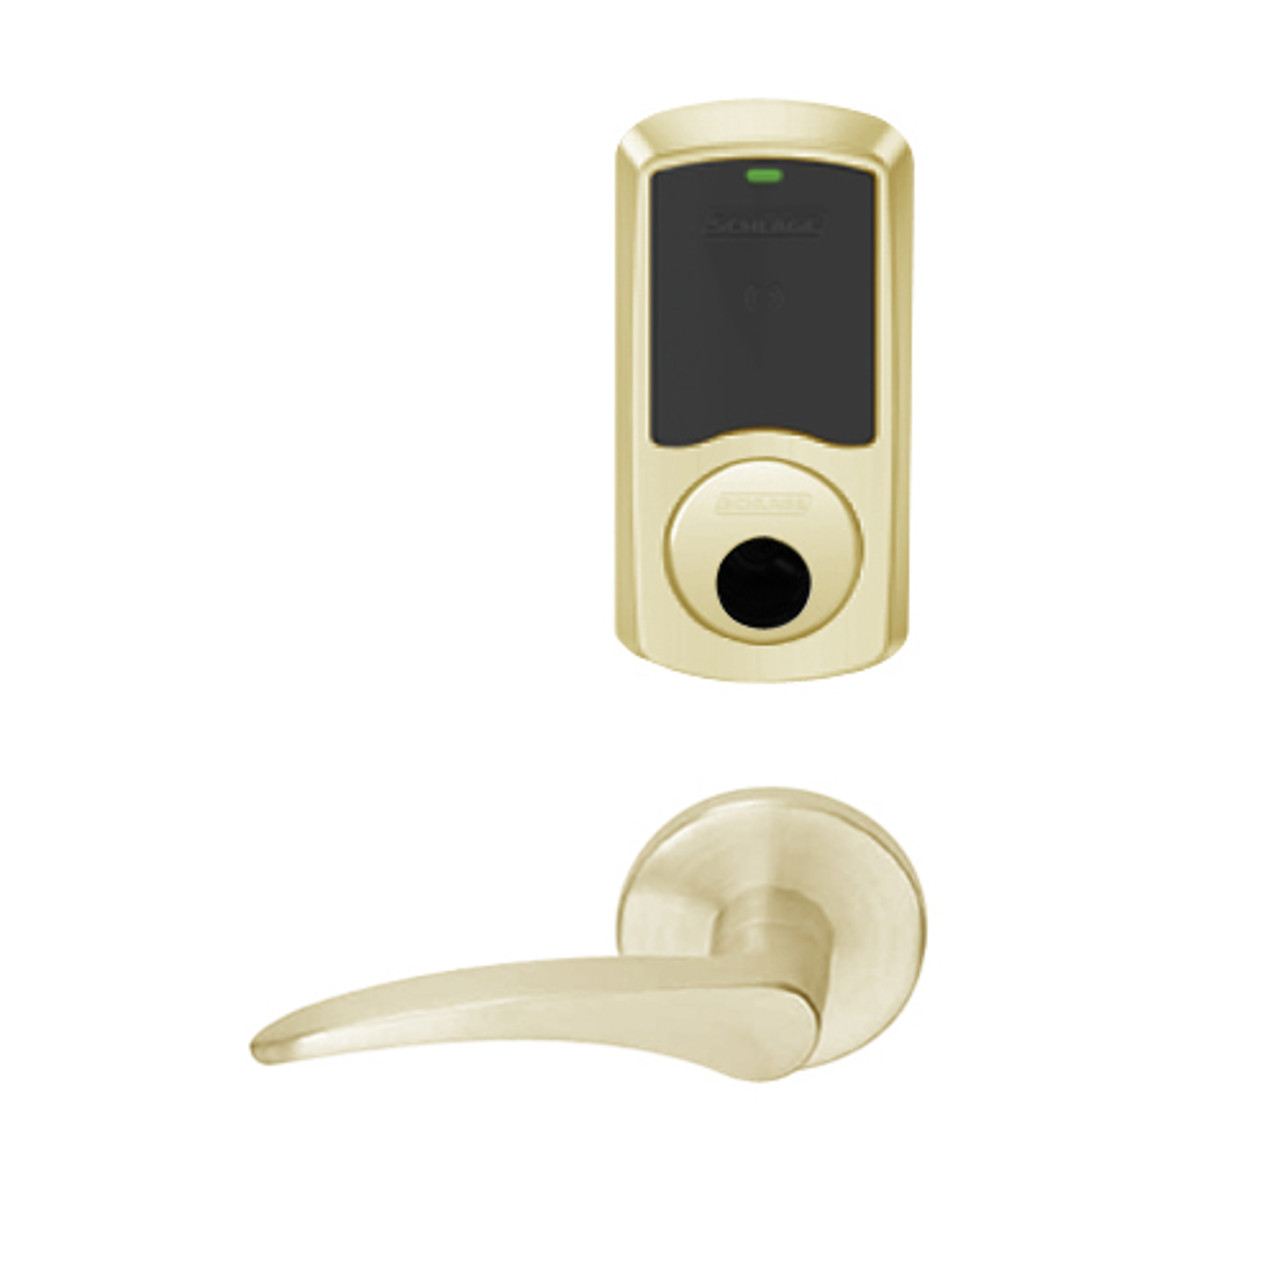 LEMD-GRW-L-12-606-00B-LH Schlage Less Cylinder Privacy/Apartment Wireless Greenwich Mortise Deadbolt Lock with LED and 12 Lever in Satin Brass